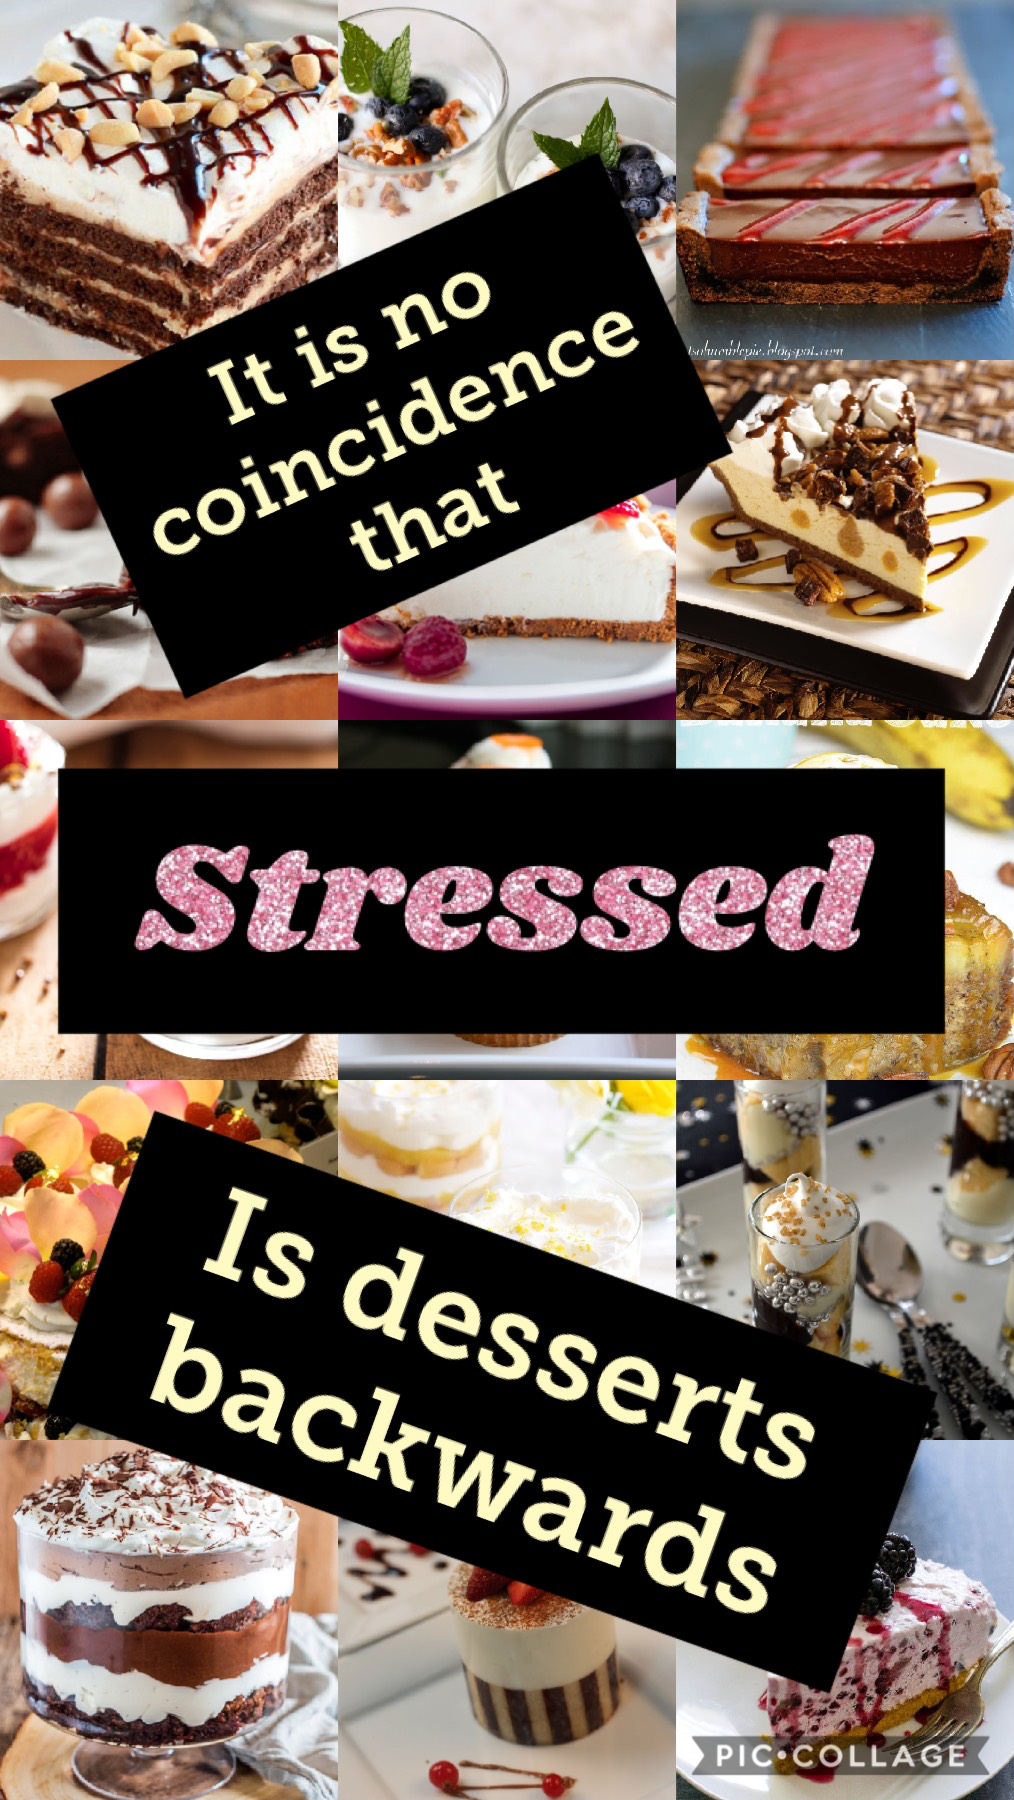 It is no coincidence that stressed is desserts backwards, have a nice ice cream and all will be ok 💖